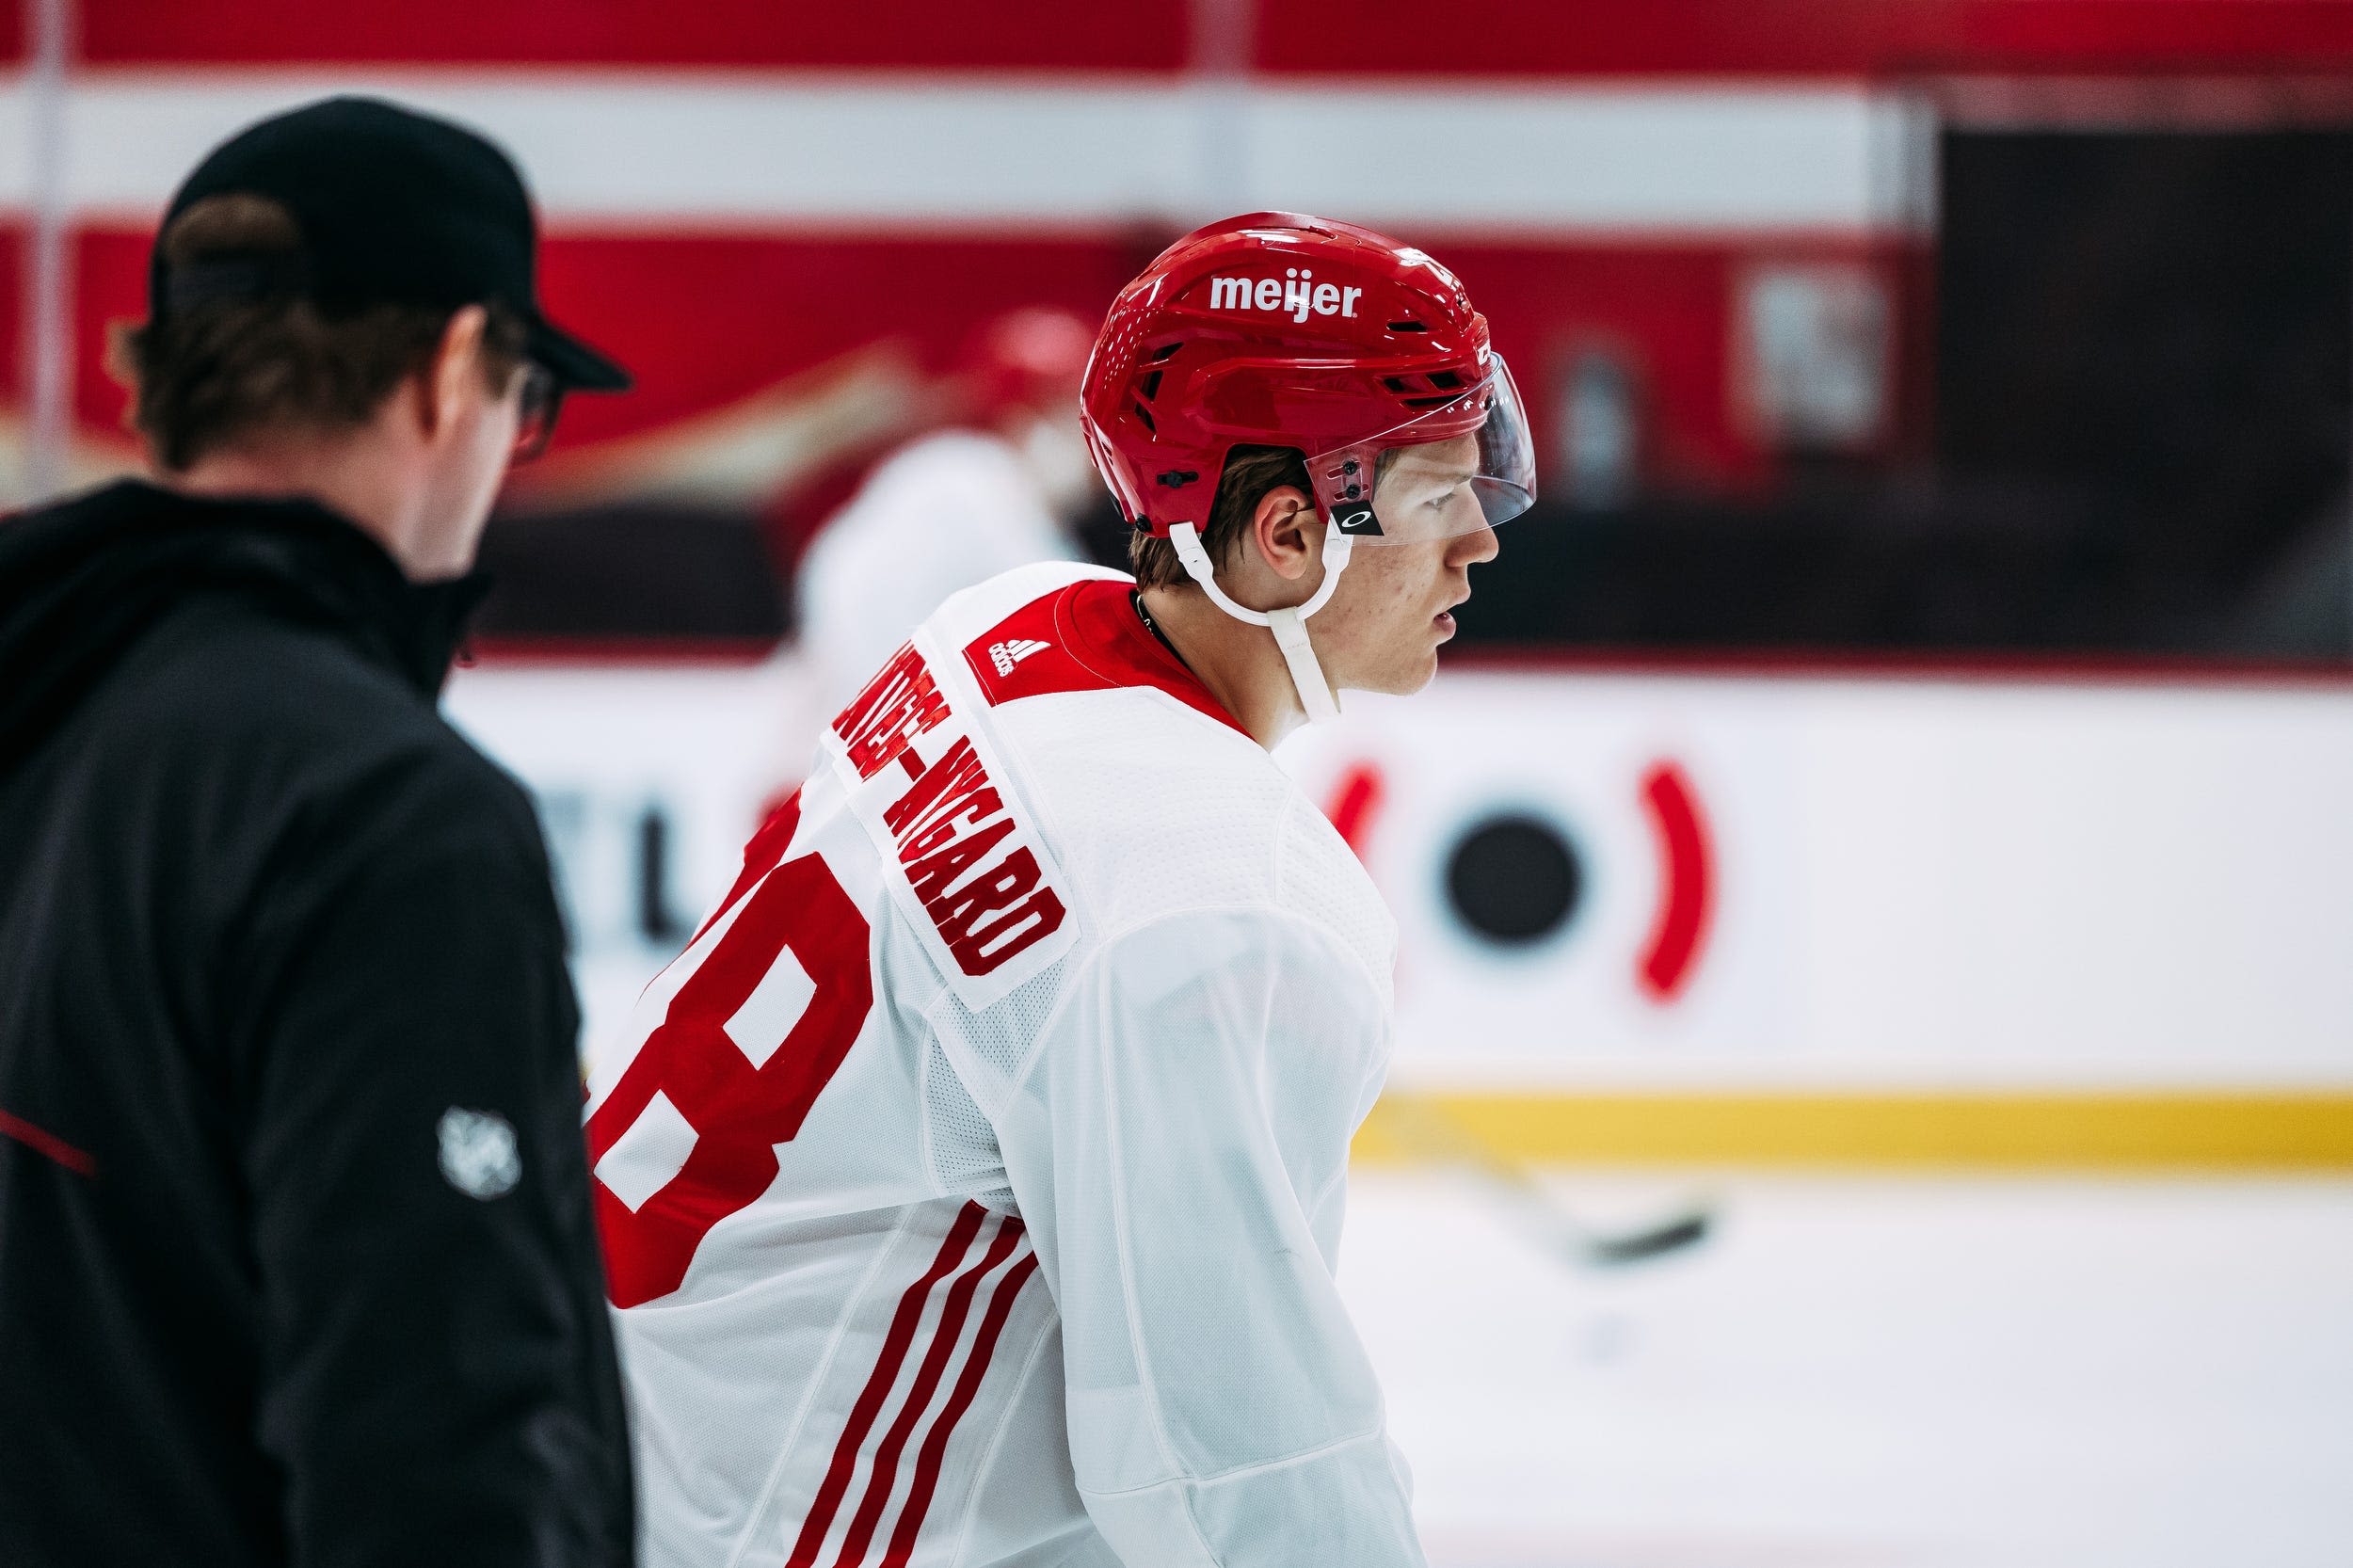 From nicknames to nutrition, Detroit Red Wings development camp wraps as 'one of the best'